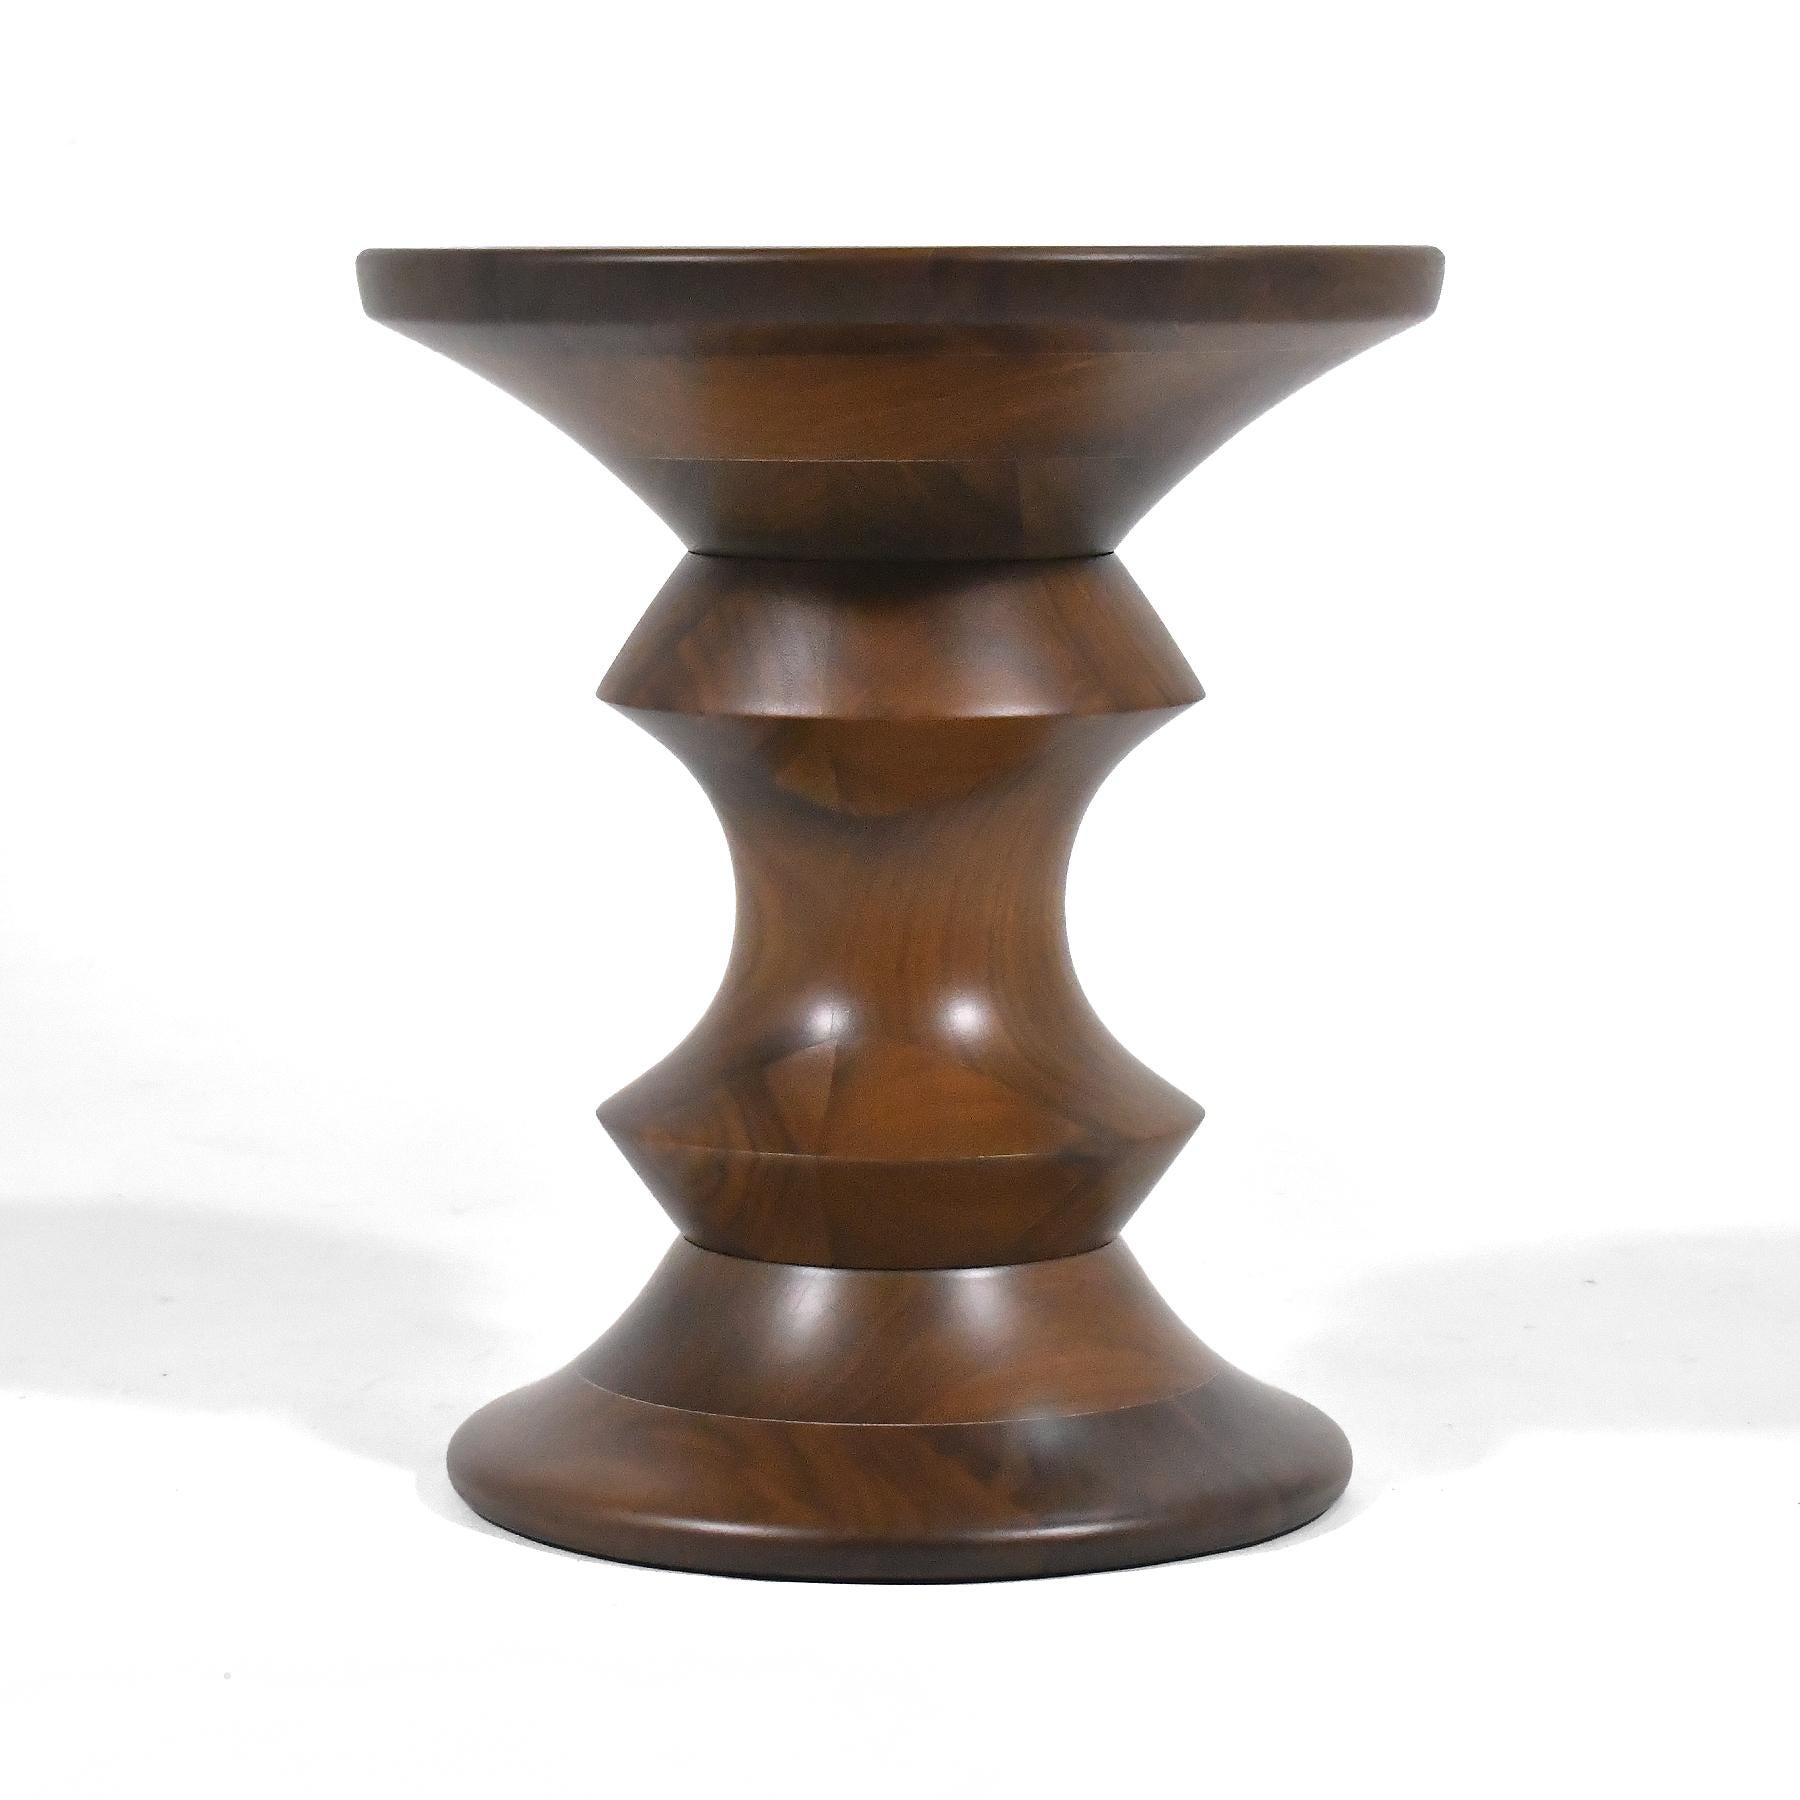 This model 411 walnut stool is one of three designs which were originally created by Charles and Ray Eames for the lobby of the Time-Life building in 1961. The solid walnut forms function equally well as a stool or side table. Often reffered to as